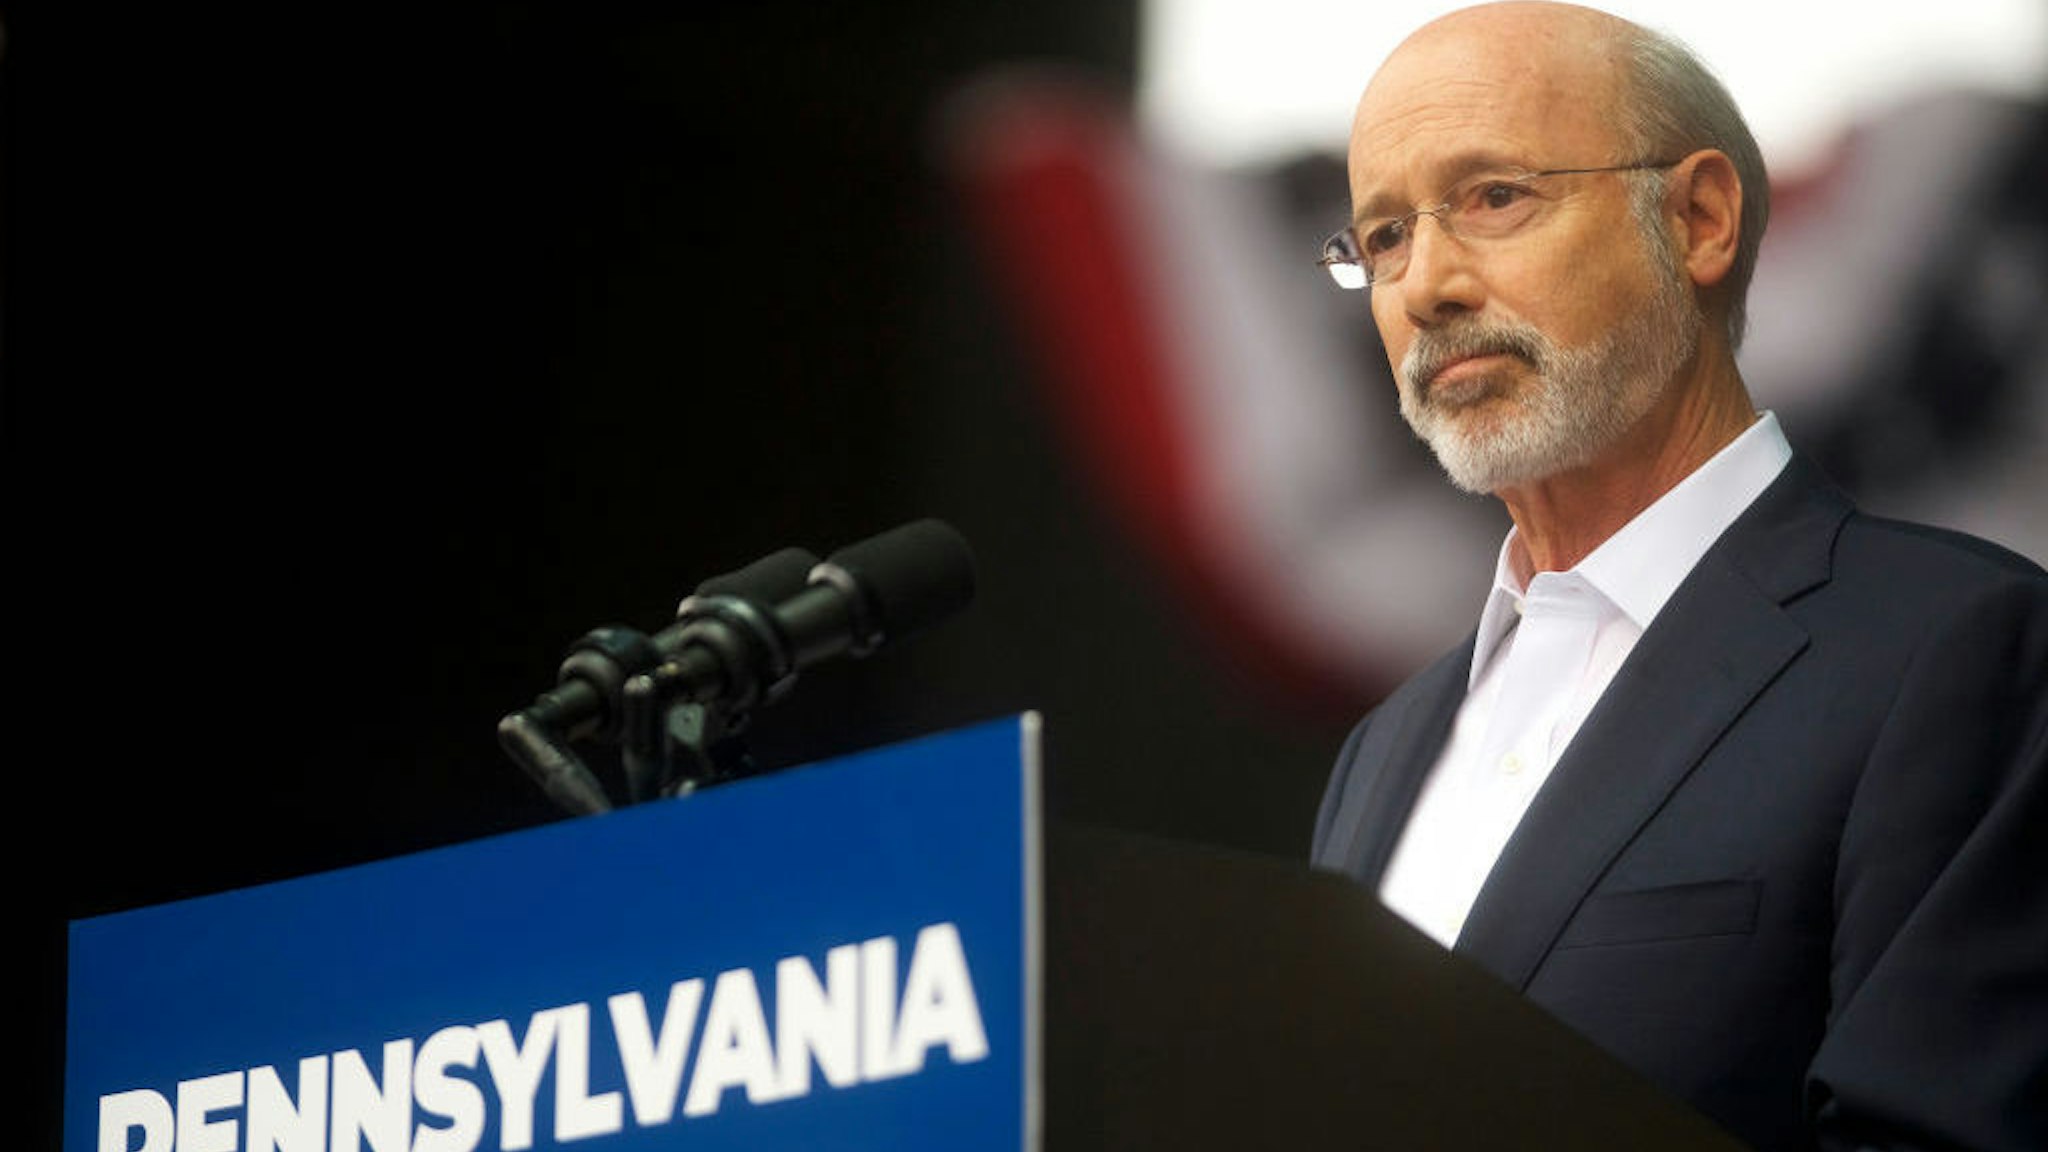 PHILADELPHIA, PA - SEPTEMBER 21: Pennsylvania Governor Tom Wolf speaks before former President Barack Obama during a campaign rally for statewide Democratic candidates on September 21, 2018 in Philadelphia, Pennsylvania. Midterm election day is November 6th. (Photo by Mark Makela/Getty Images)